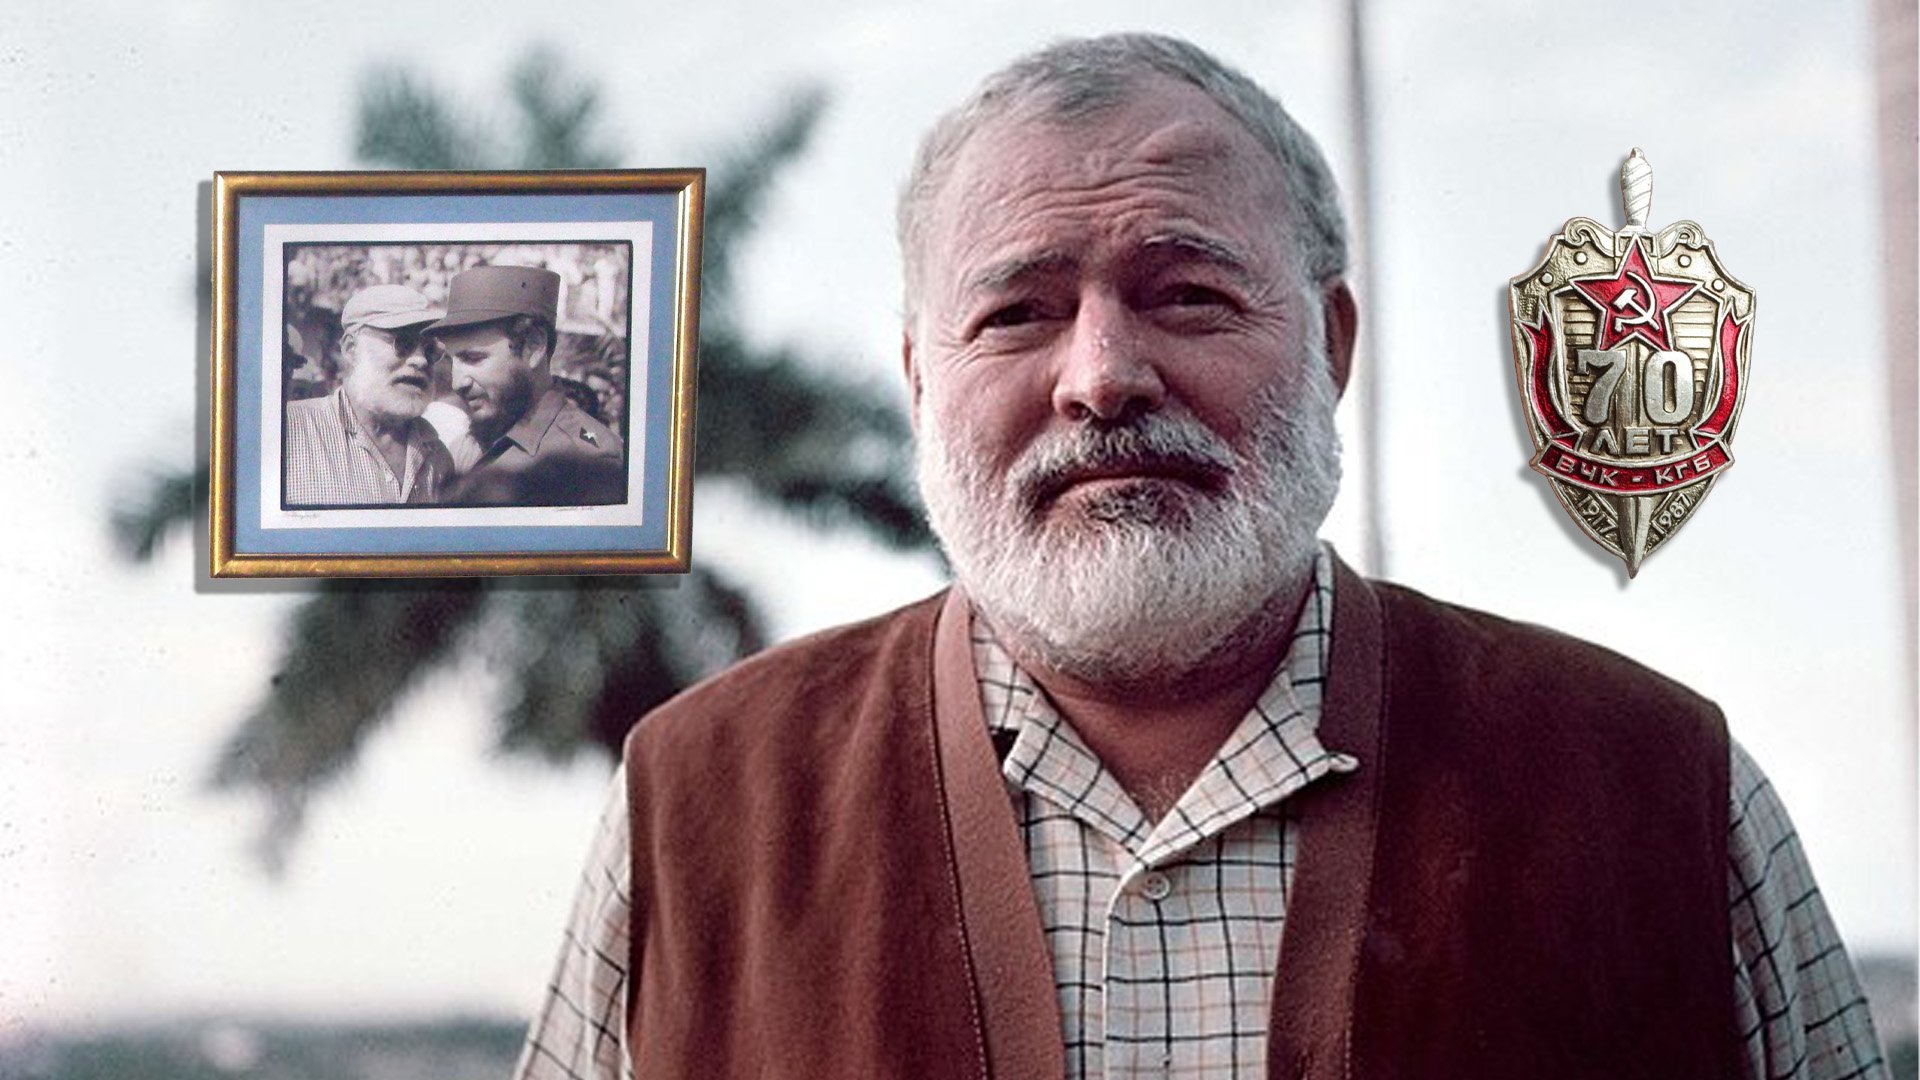 Did Ernest Hemingway, one of the 20th-century's most prolific American novelists, have involvement in espionage activities associated with the FBI and the KGB? Wikimedia Commons photos. Composite by Coffee or Die Magazine.